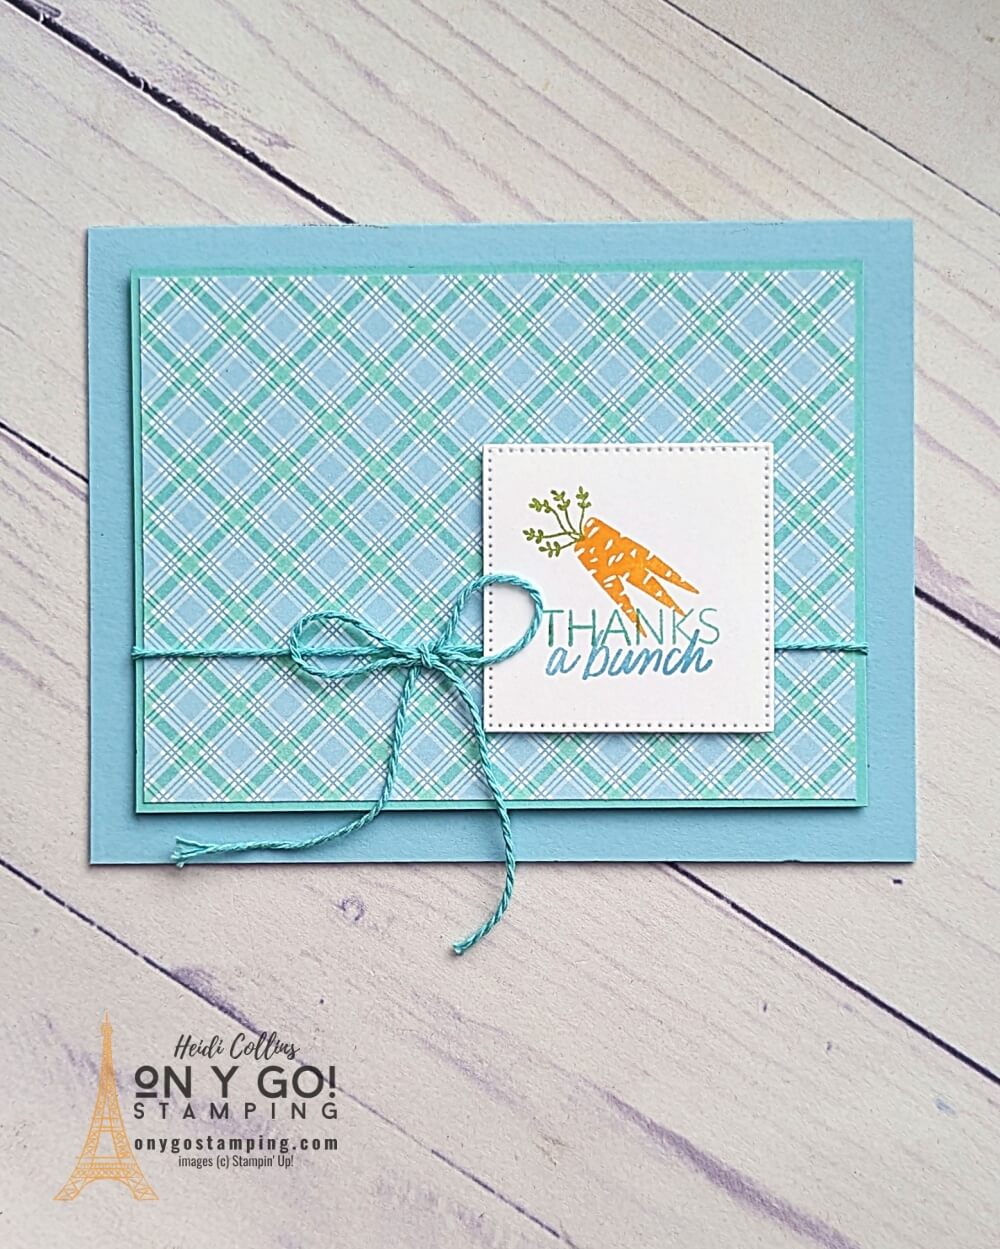 Ready for FREE stamps like the Thanks a Bunch stamp set during Sale-A-Bration 2023? This handmade thank you card uses the Thanks a Bunch stamp set from Stampin' Up!®